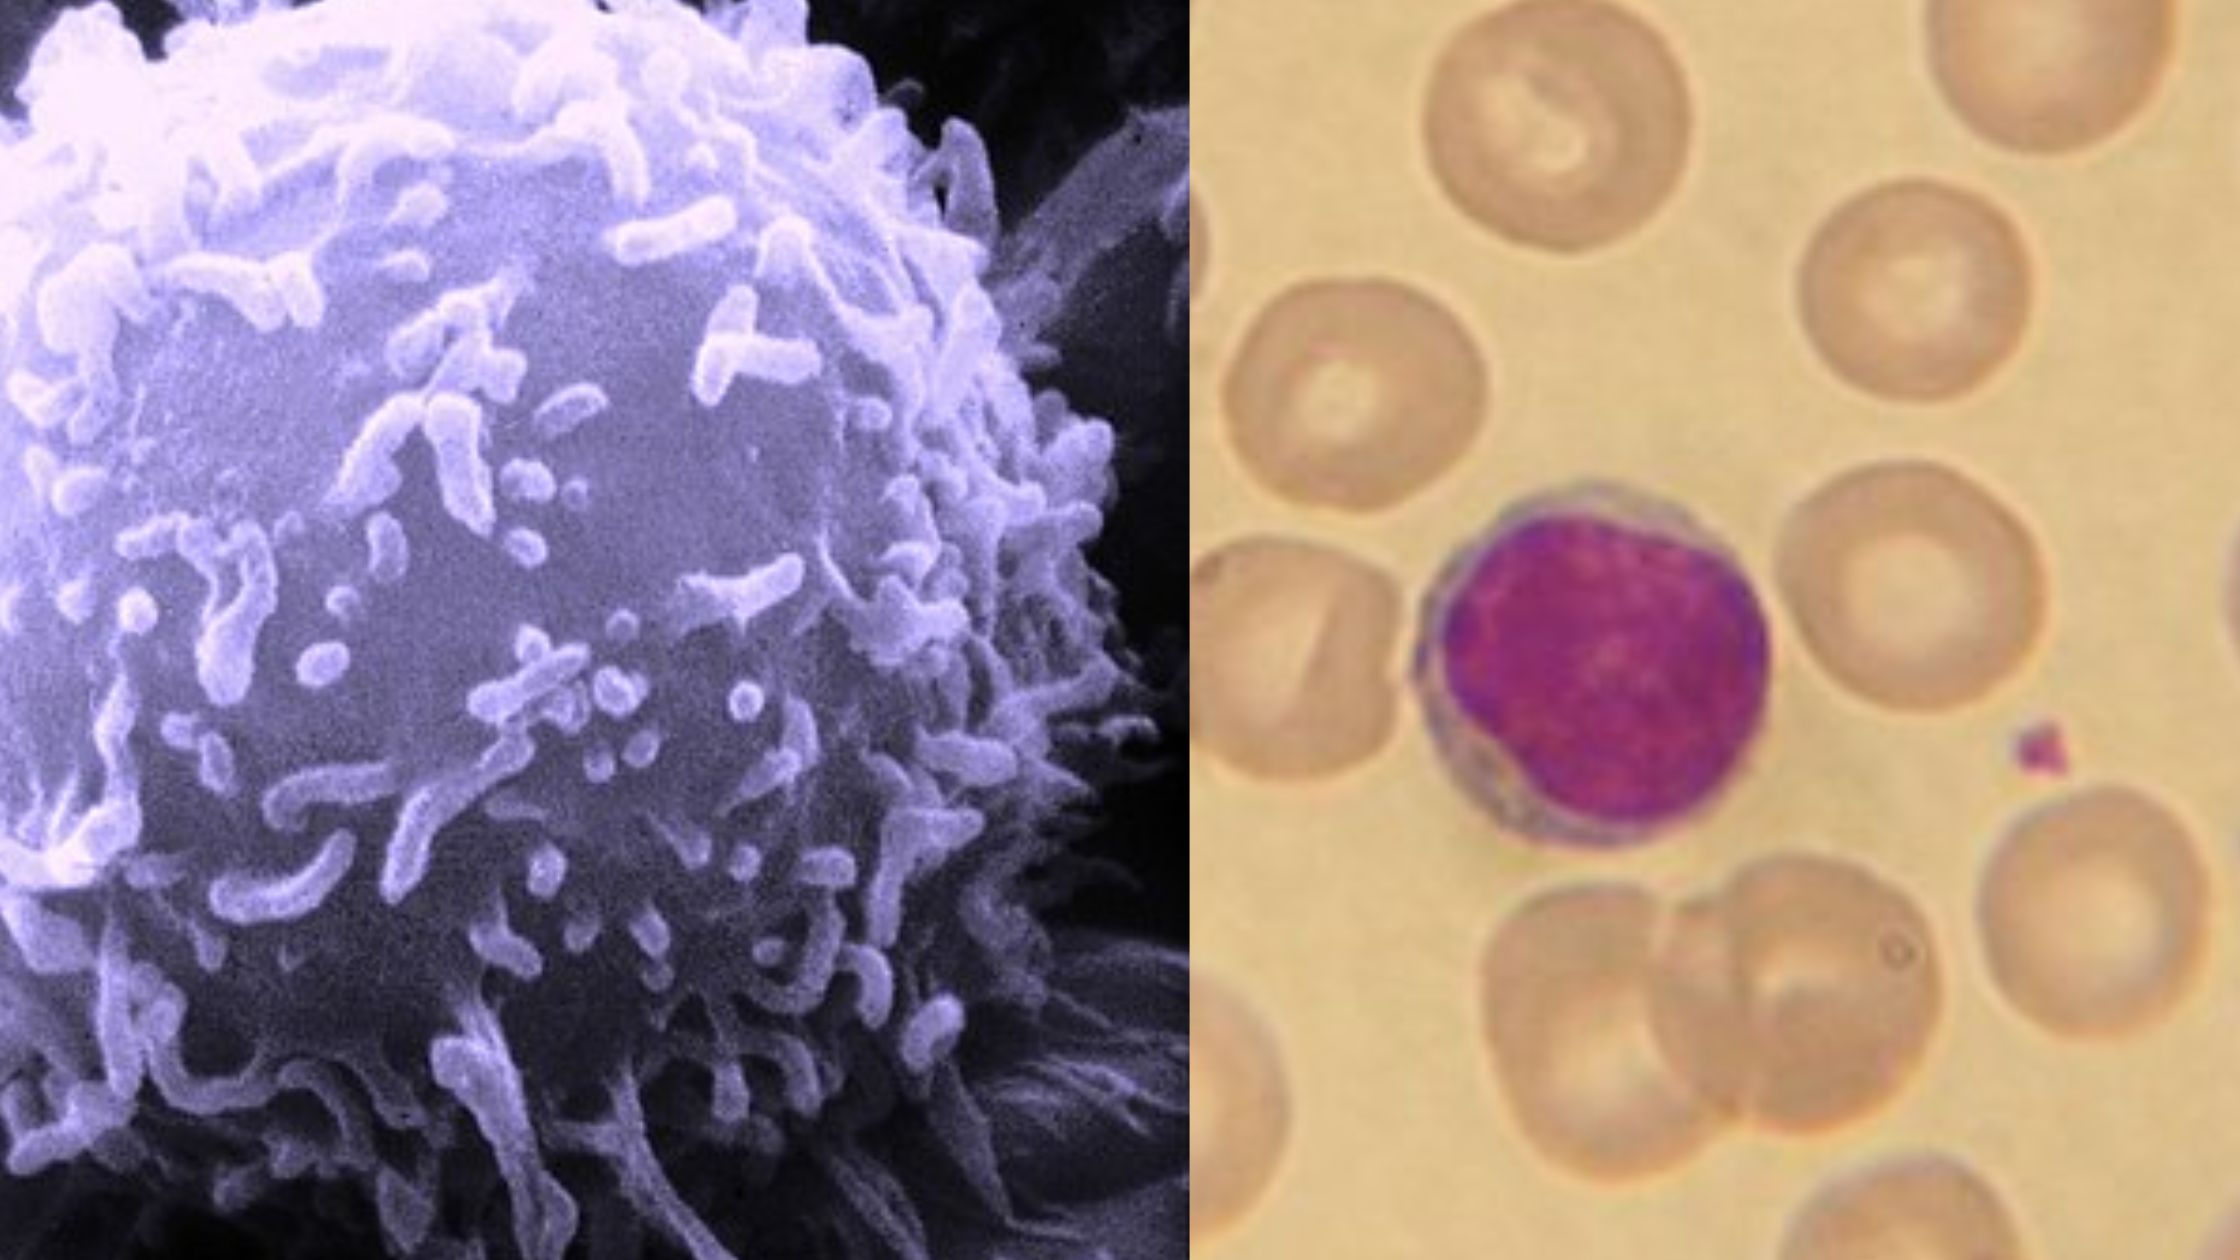 Lymphocytes - Definition, Development, Types and Functions